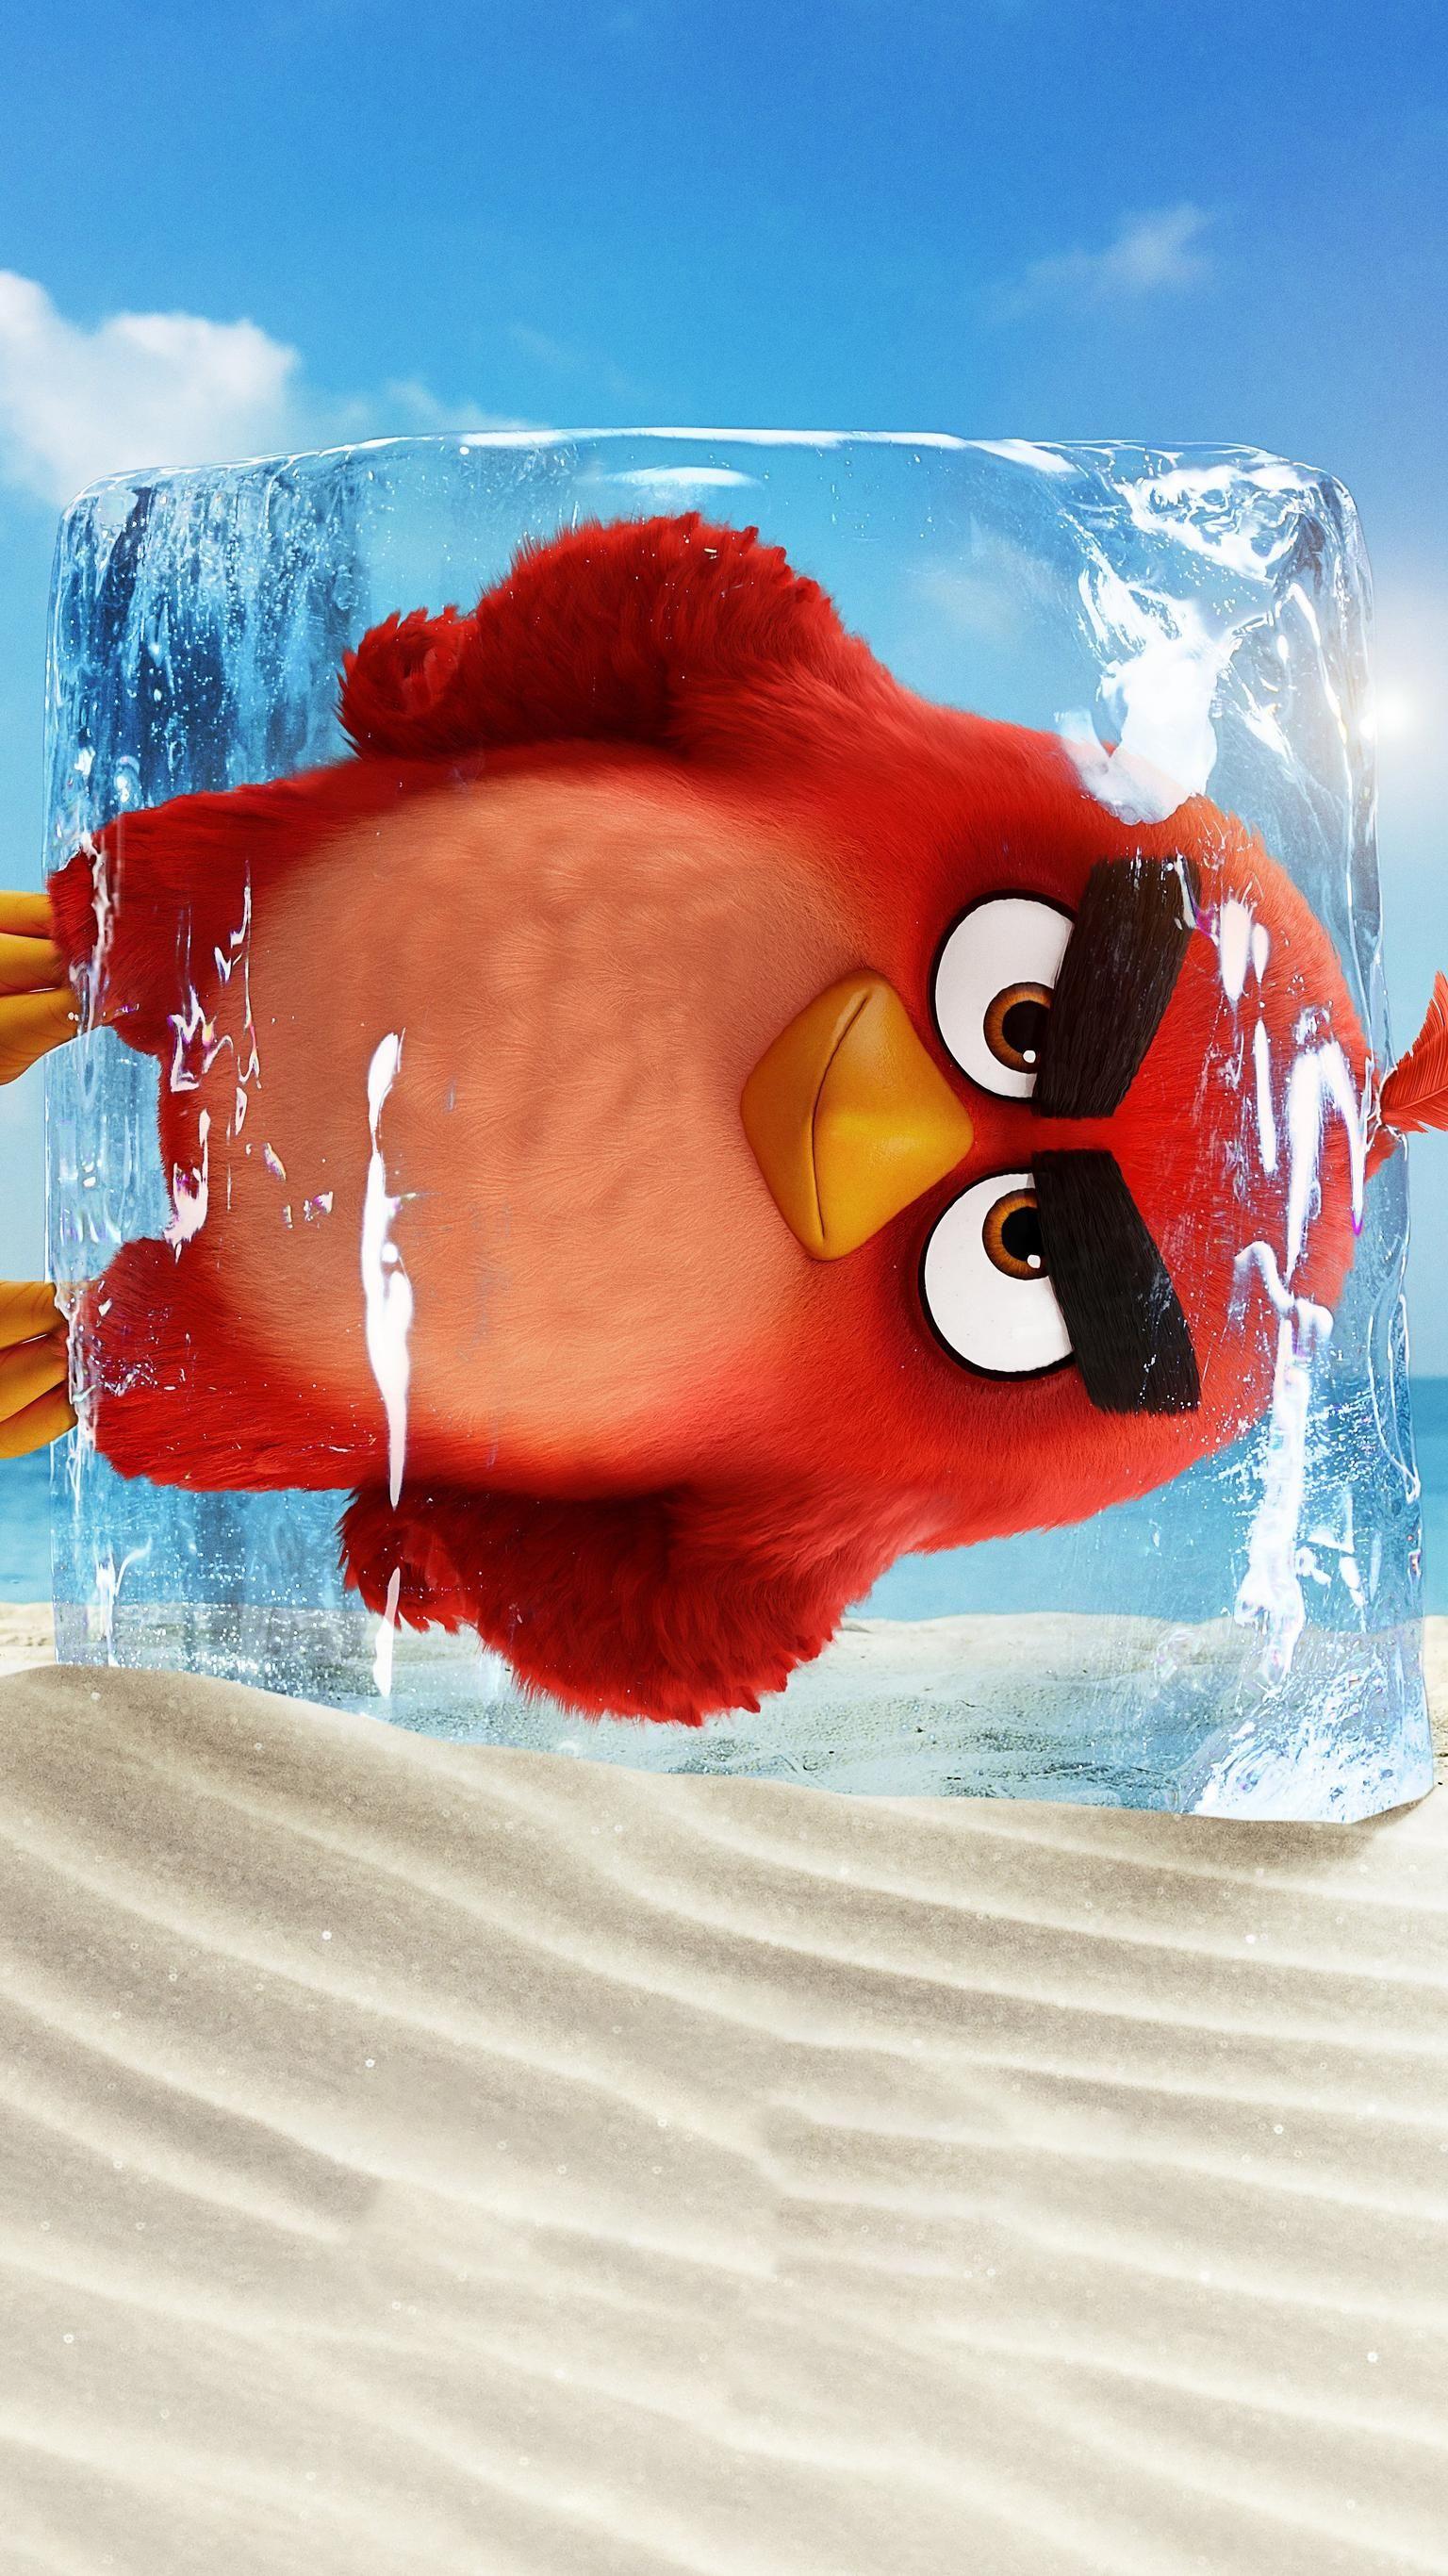 The Angry Birds Movie 2 (2019) Phone Wallpaper in 2019